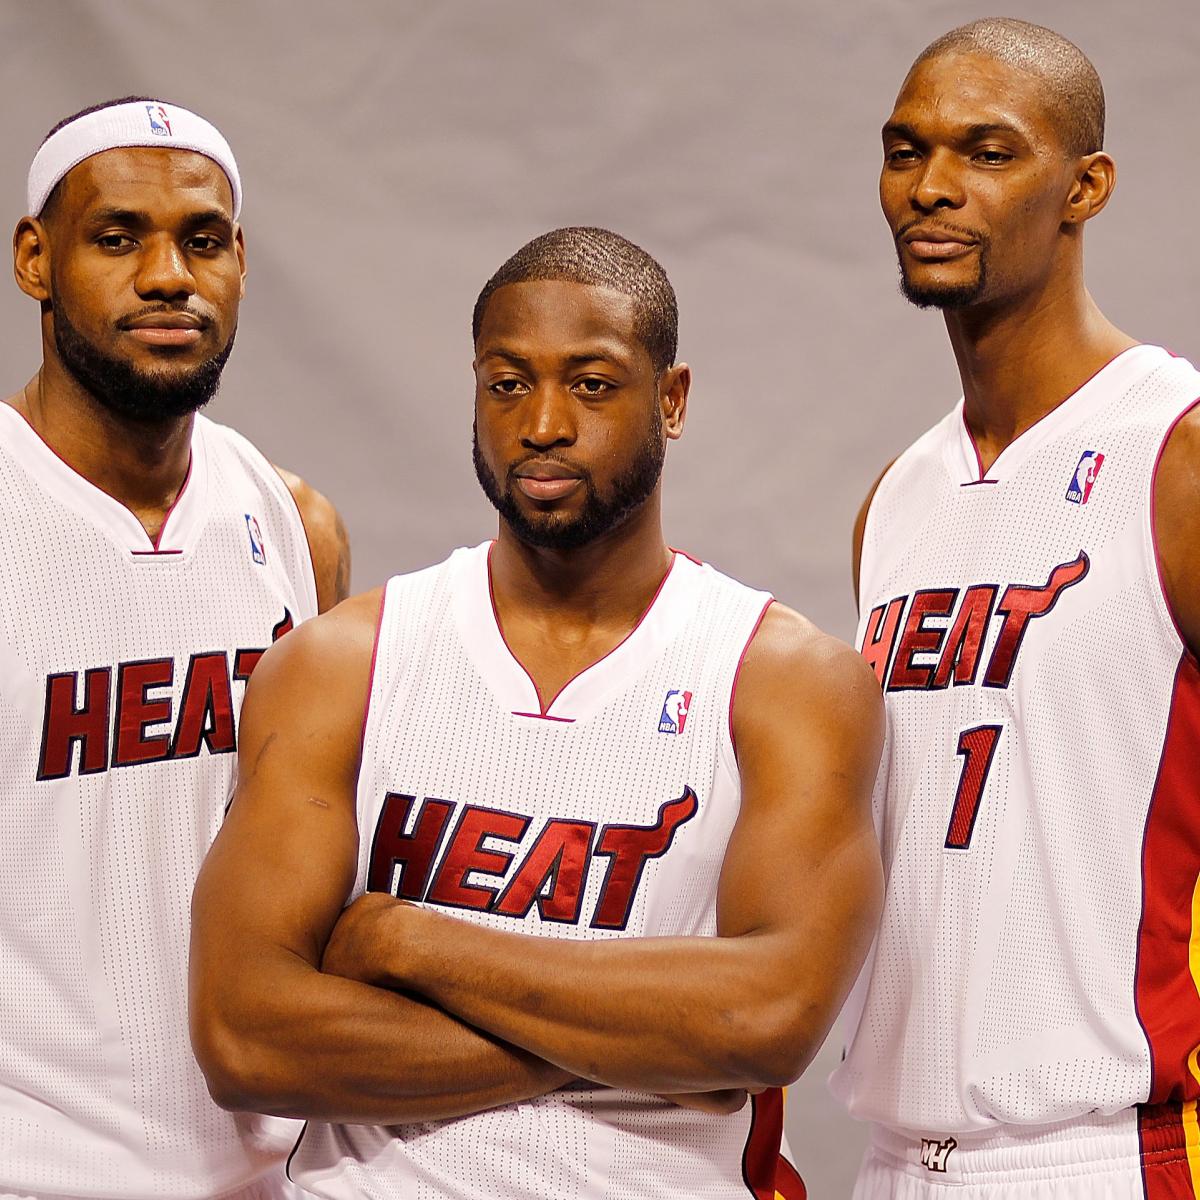 Miami Heat Rumor: Will This Be the End of the Big Three in Miami